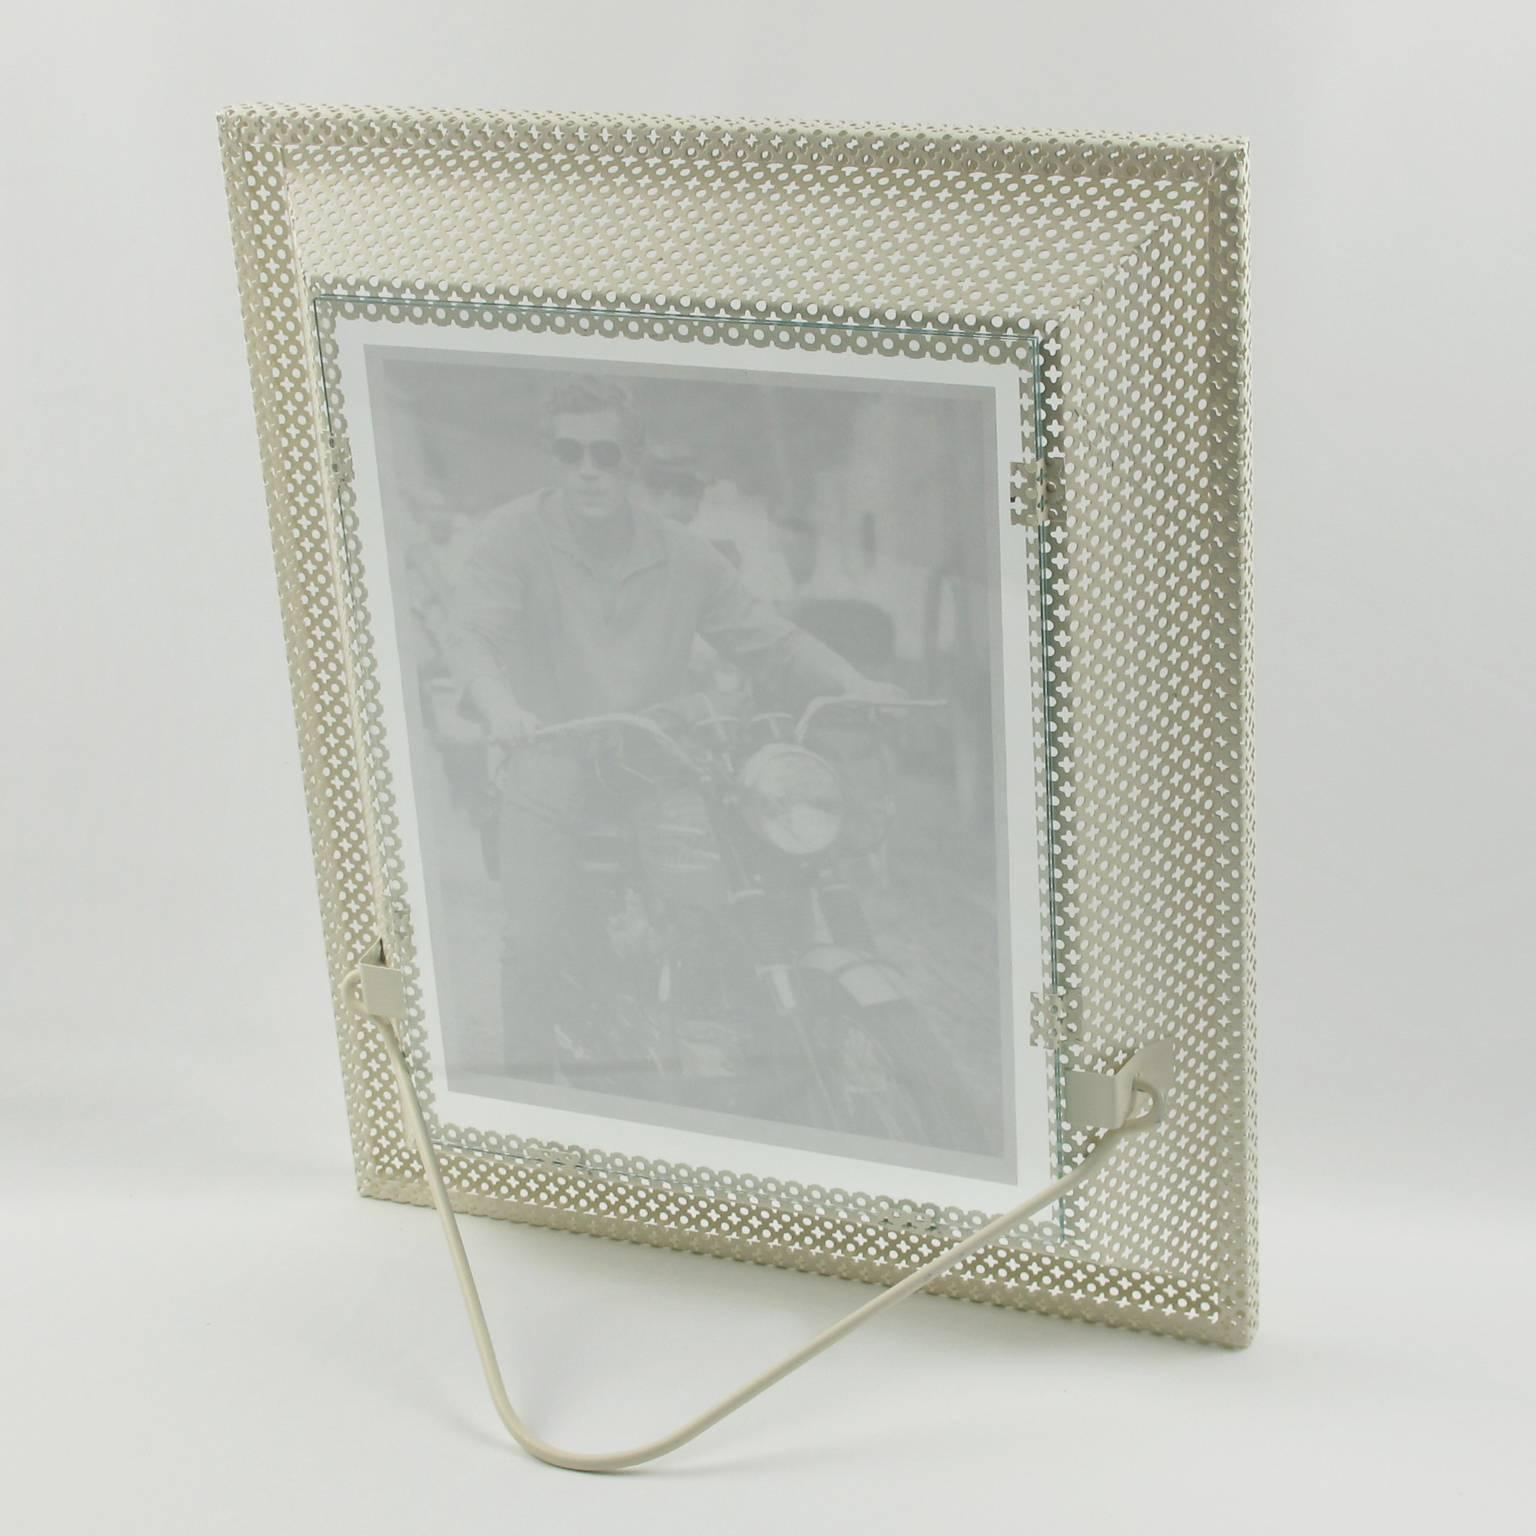 Mid-Century Modern Mathieu Mategot 1950s White Perforated Metal Picture Photo Frame